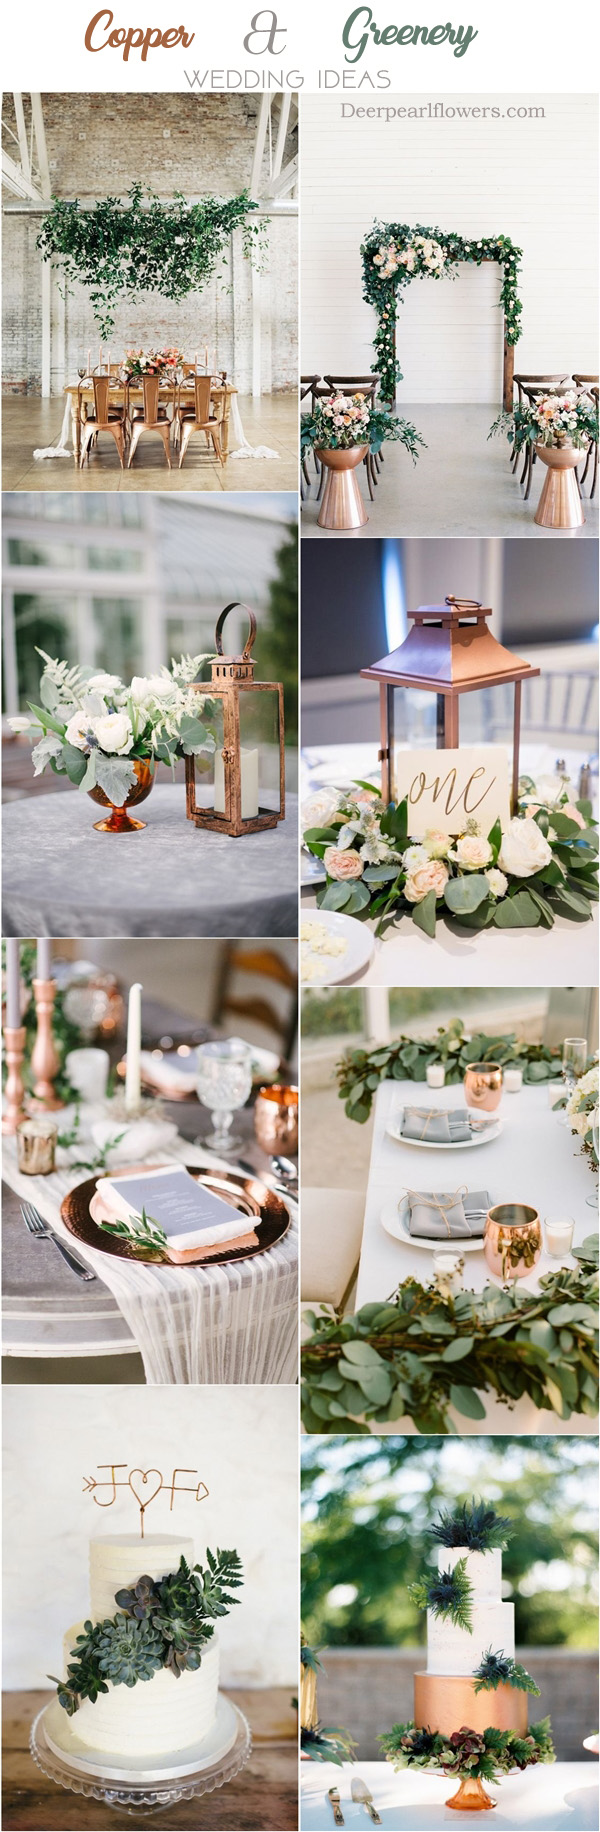 copper and greenery wedding color ideas